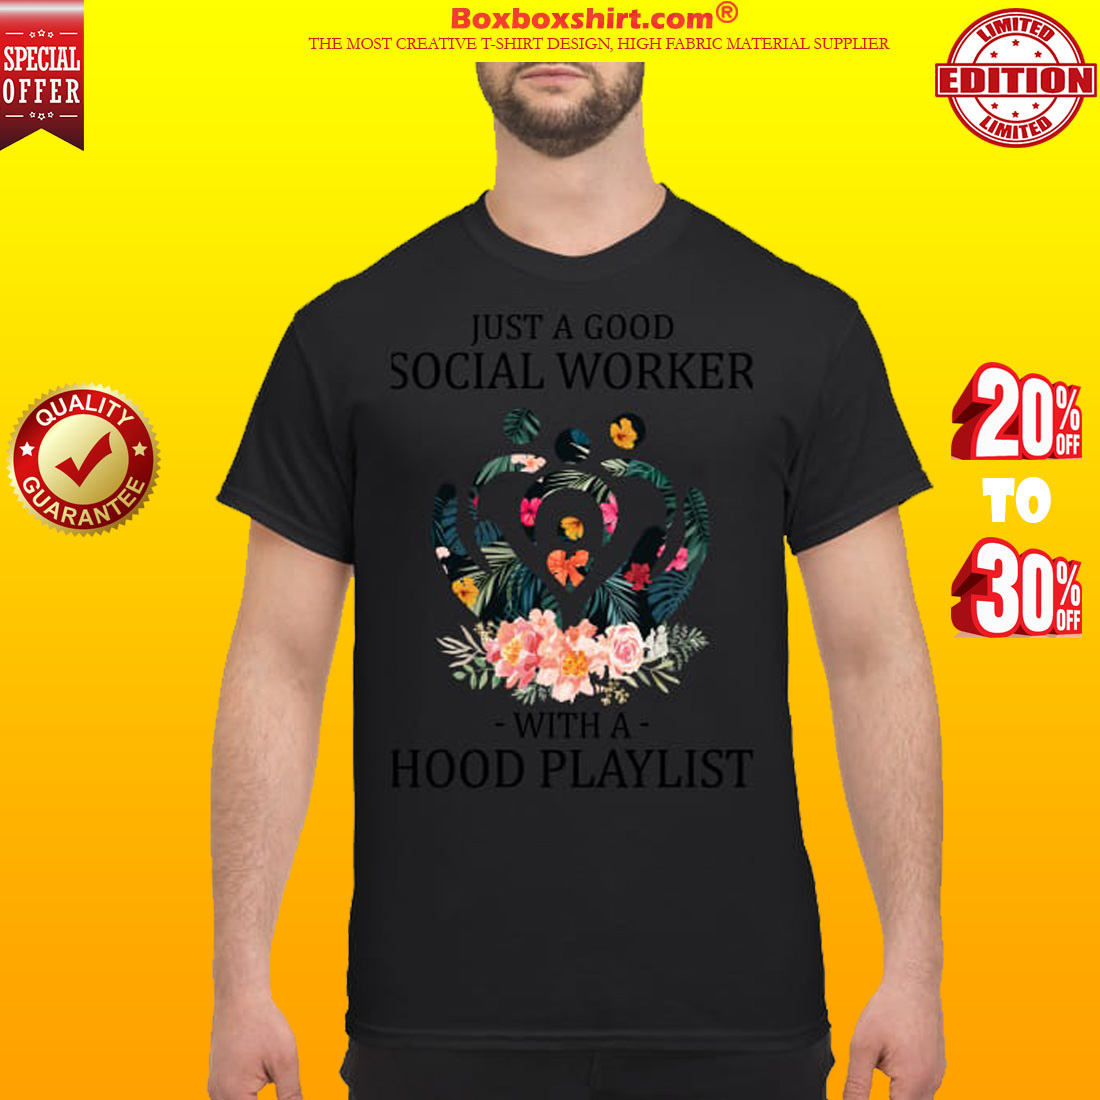 Just a good social worker with a hood playlist classic shirt